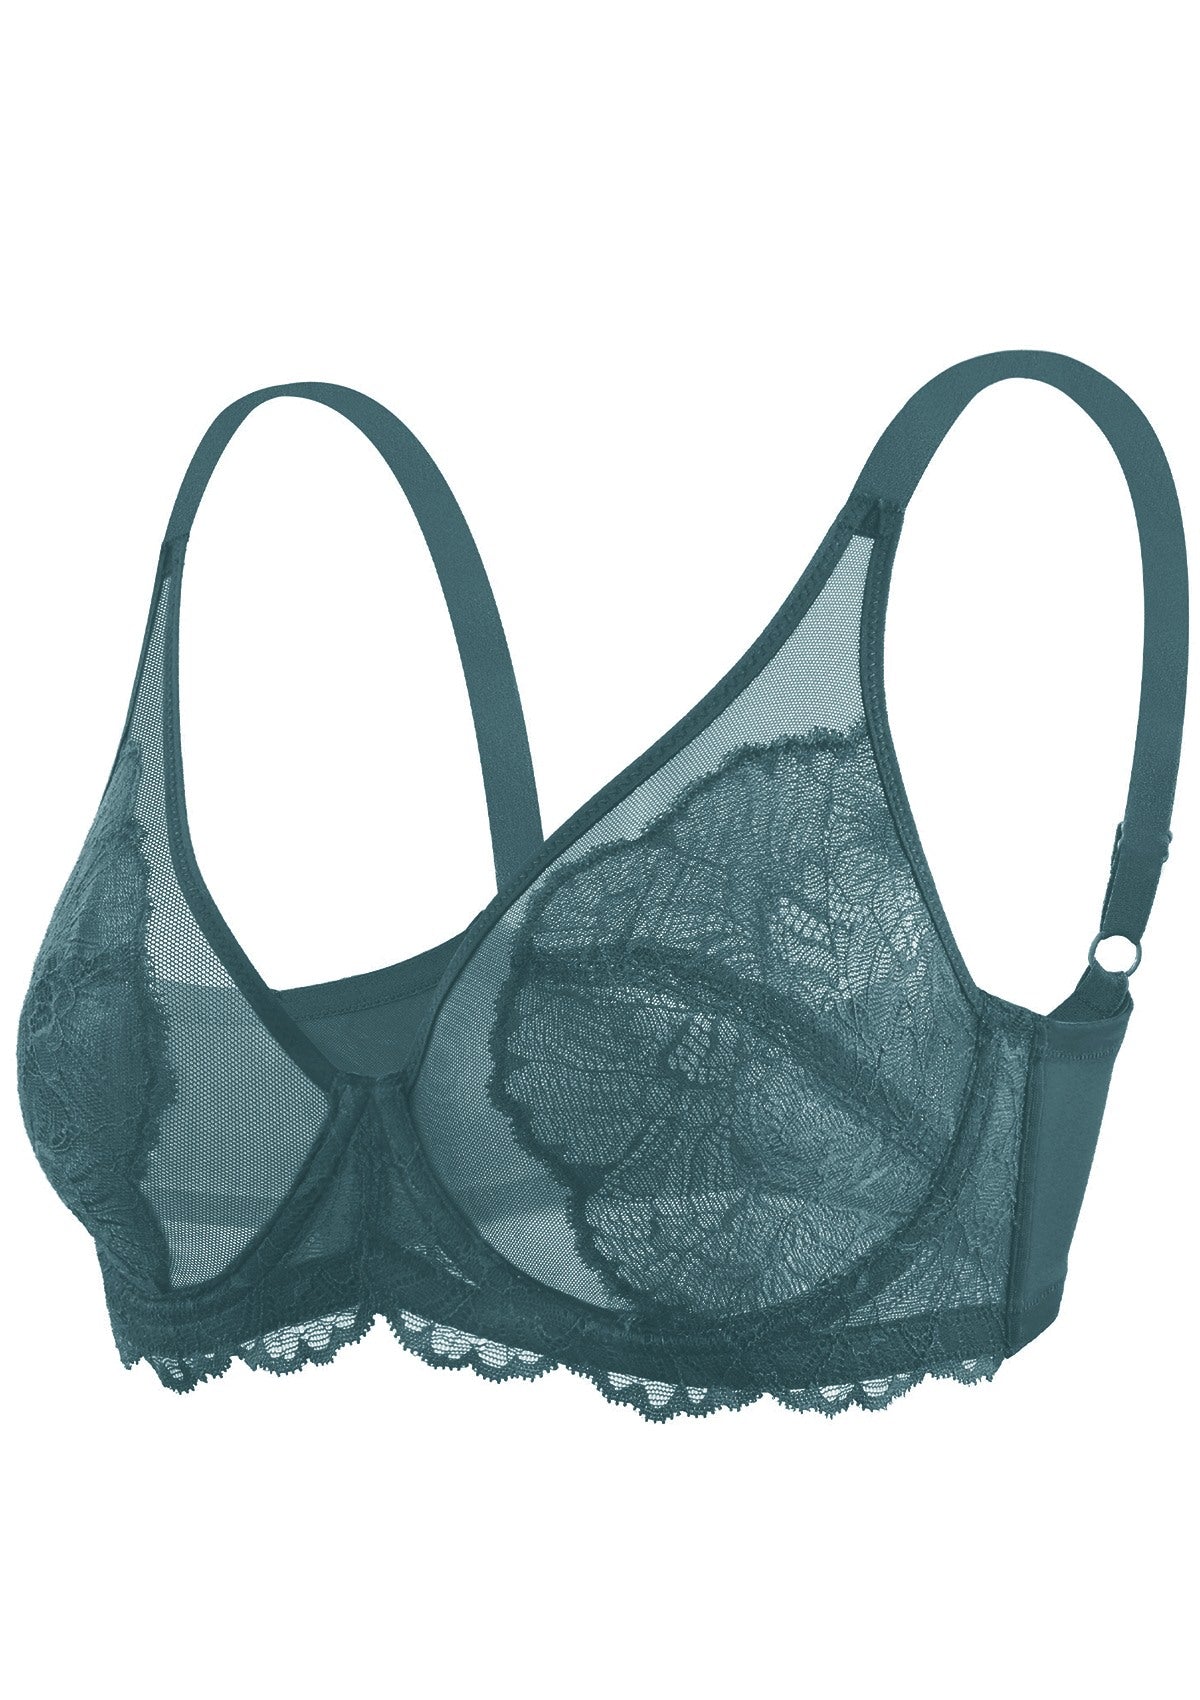 HSIA Blossom Full Figure See-Through Lace Bra For Side And Back Fat - Dark Blue / 38 / D